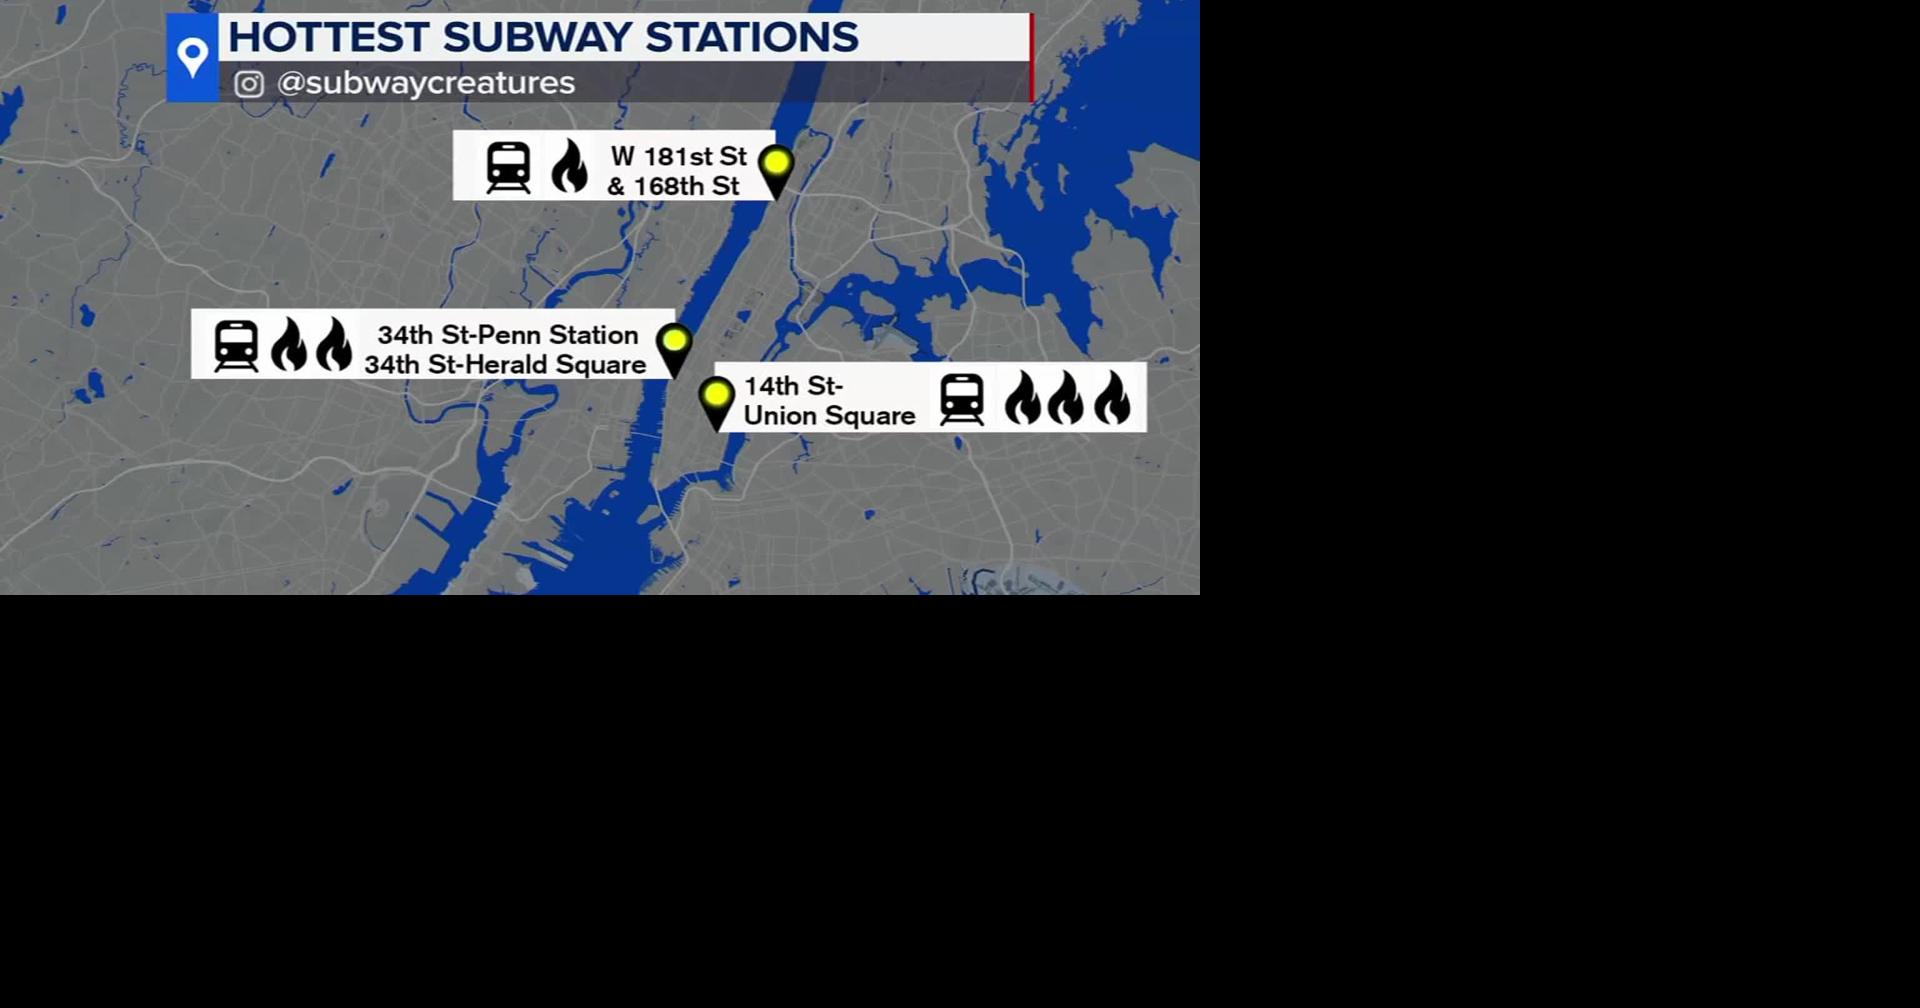 Hottest subway stations in New York City